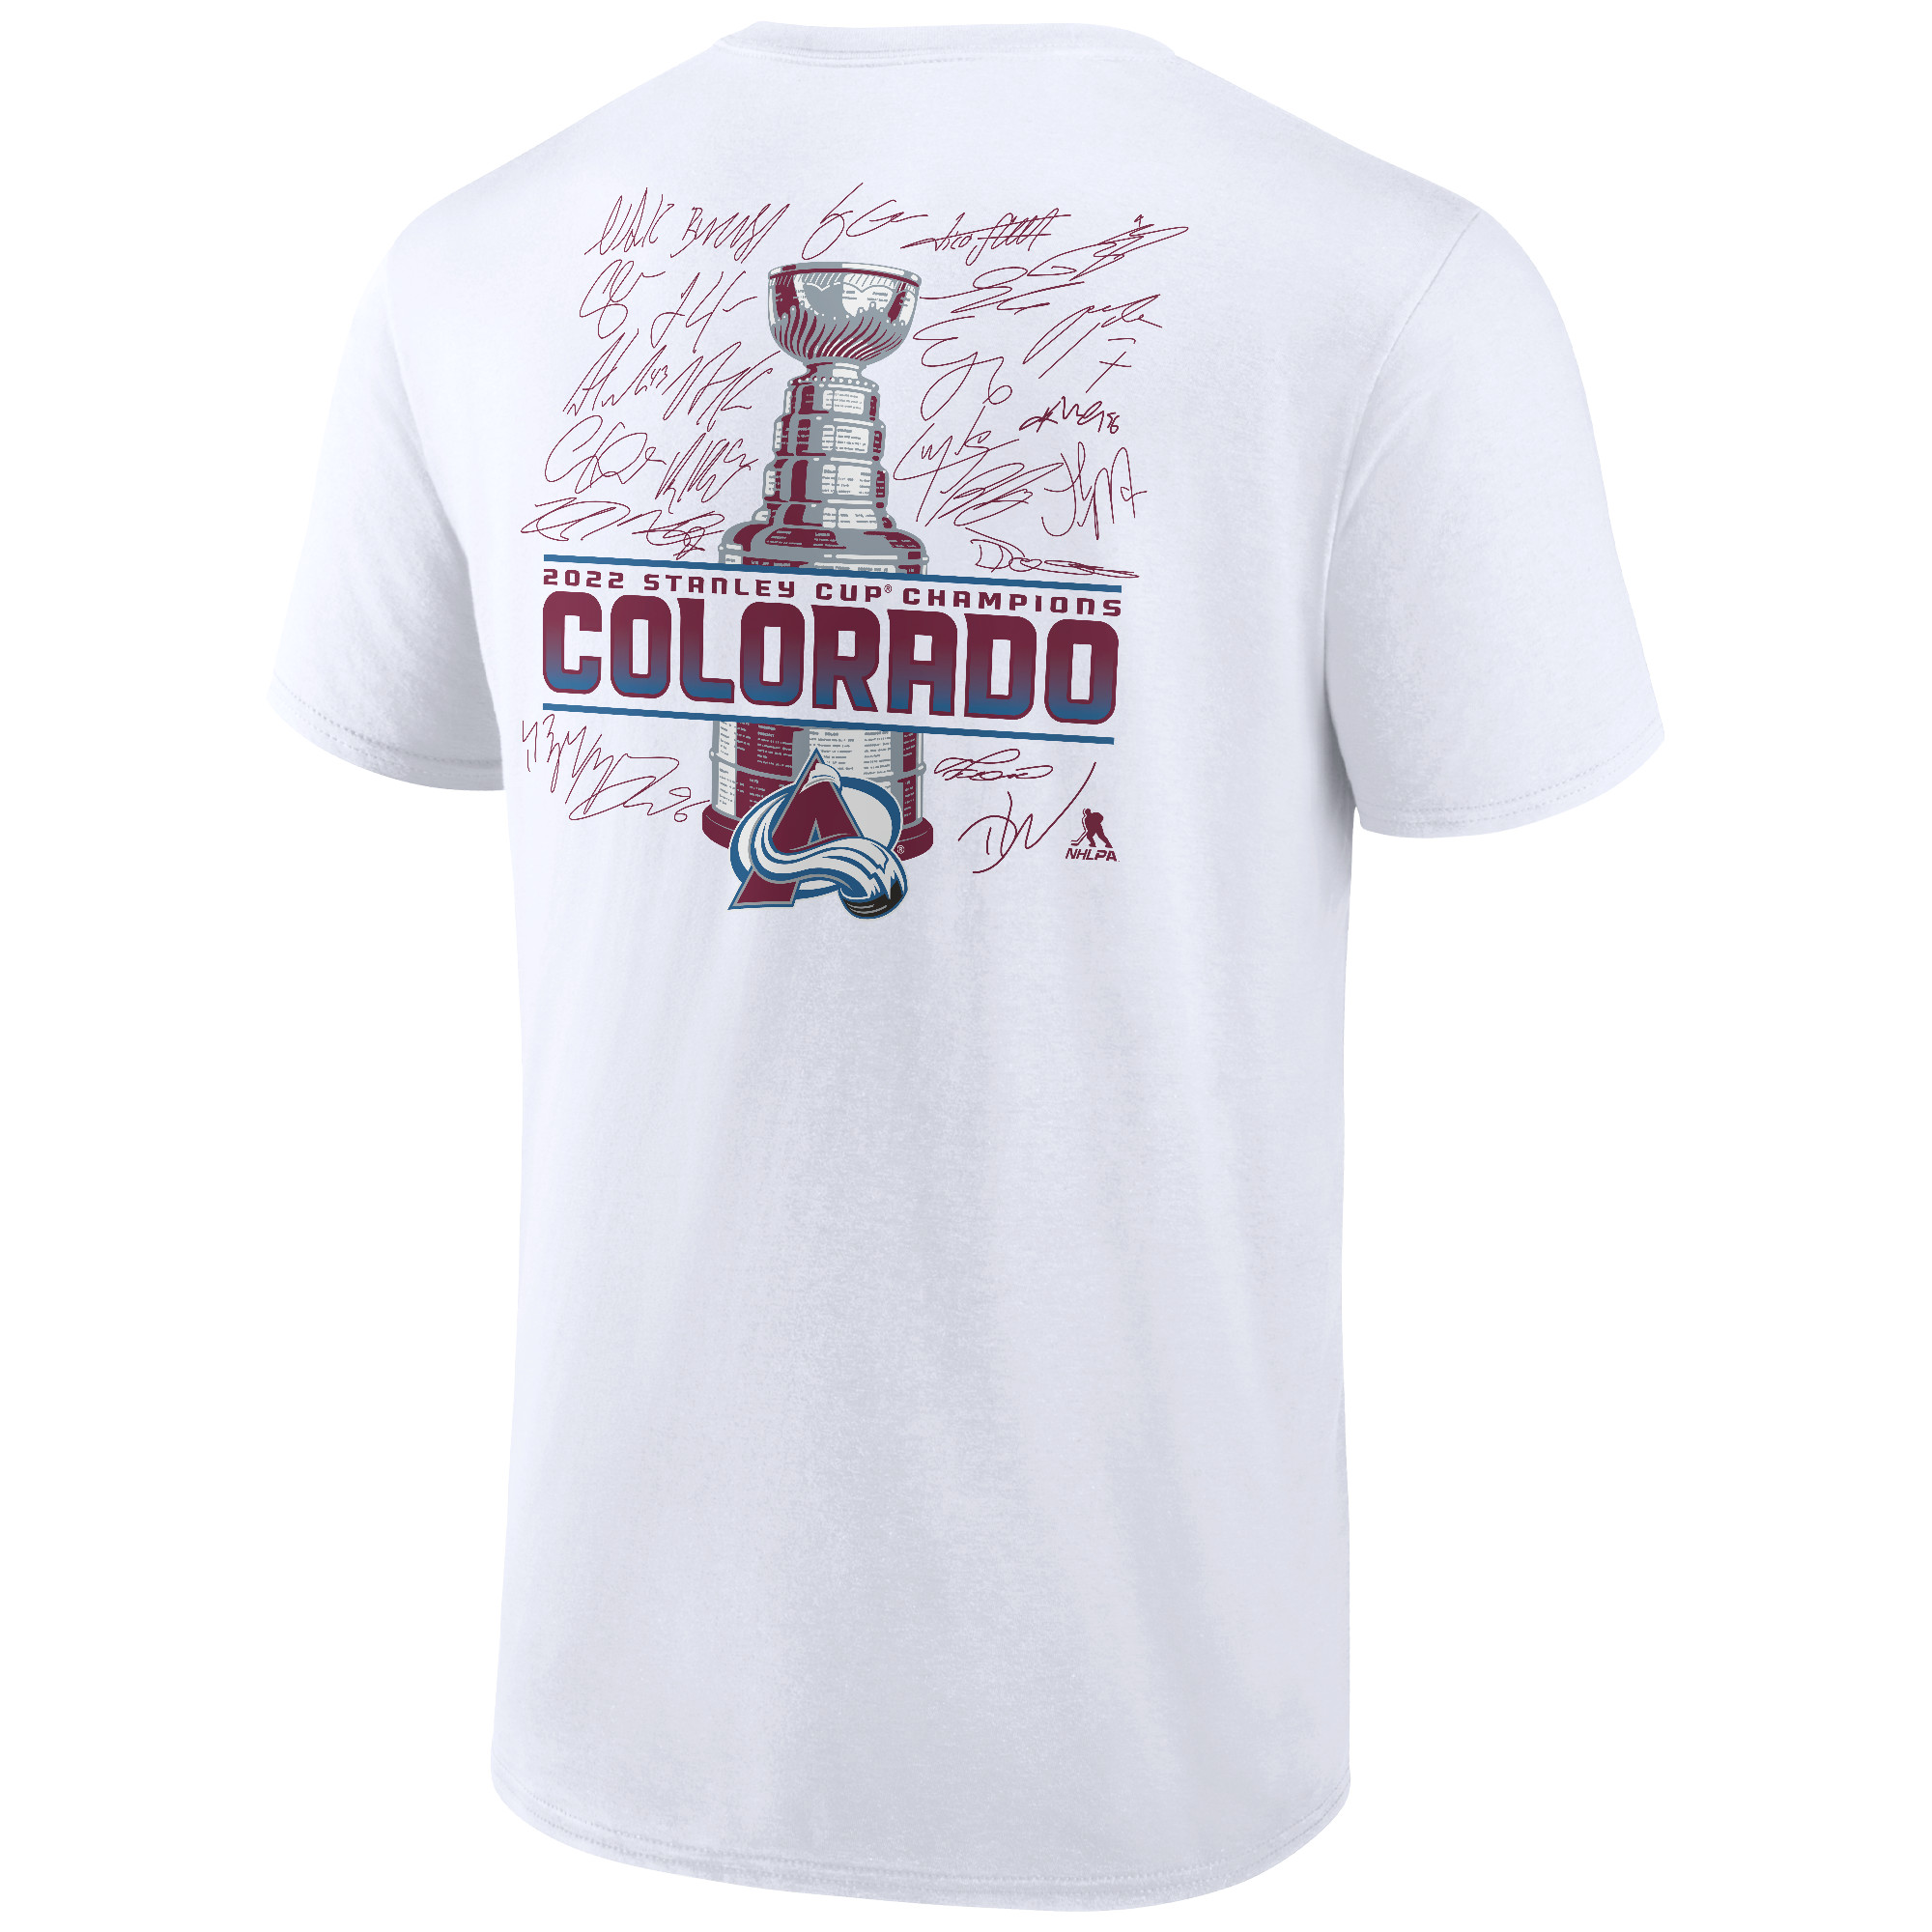 Men's Fanatics Branded White Colorado Avalanche 2022 Stanley Cup Champions Signature Roster T-Shirt - image 3 of 5